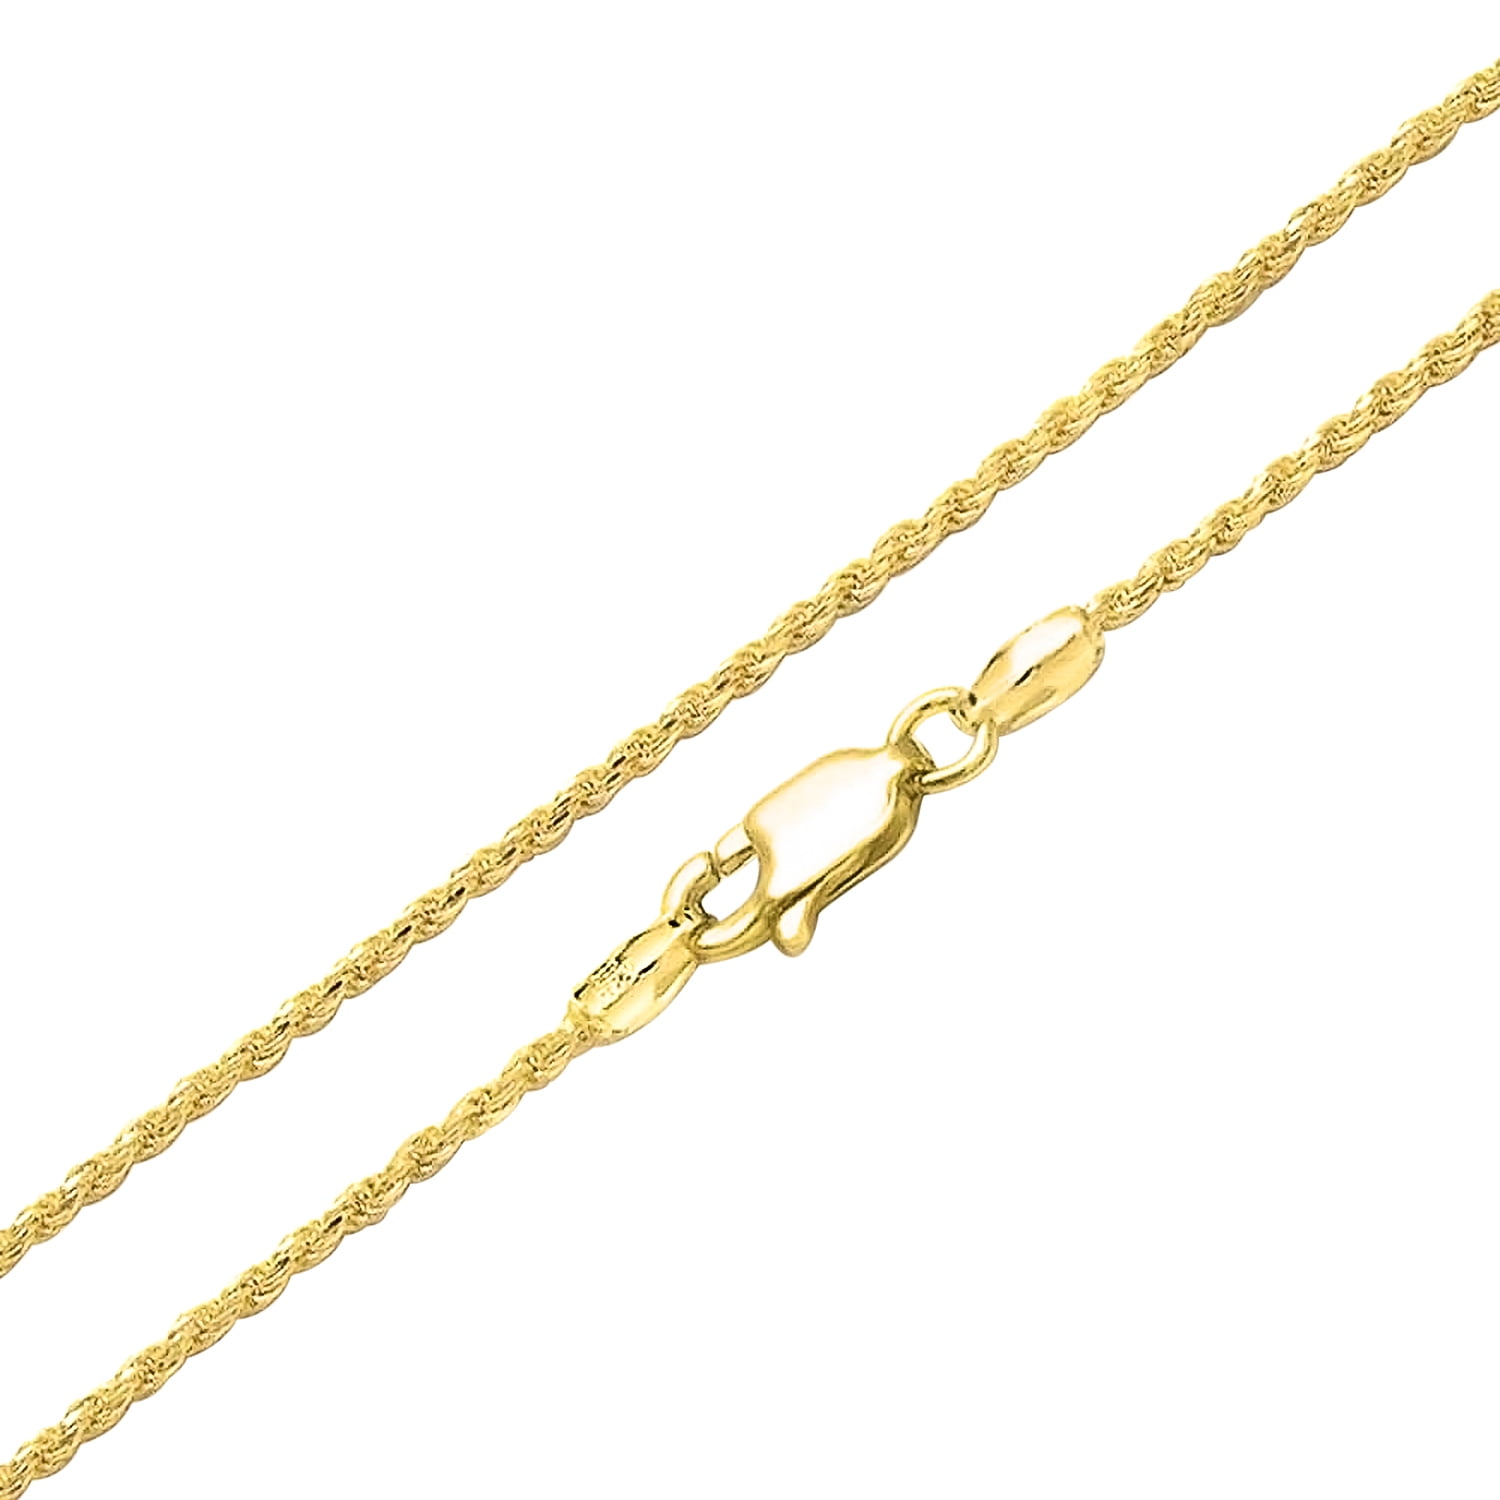 MENS LADIES 14K GOLD PLATED HIGH QUALITY 4MM MARINER LINK CHAIN NECKLACE 20~24'' 